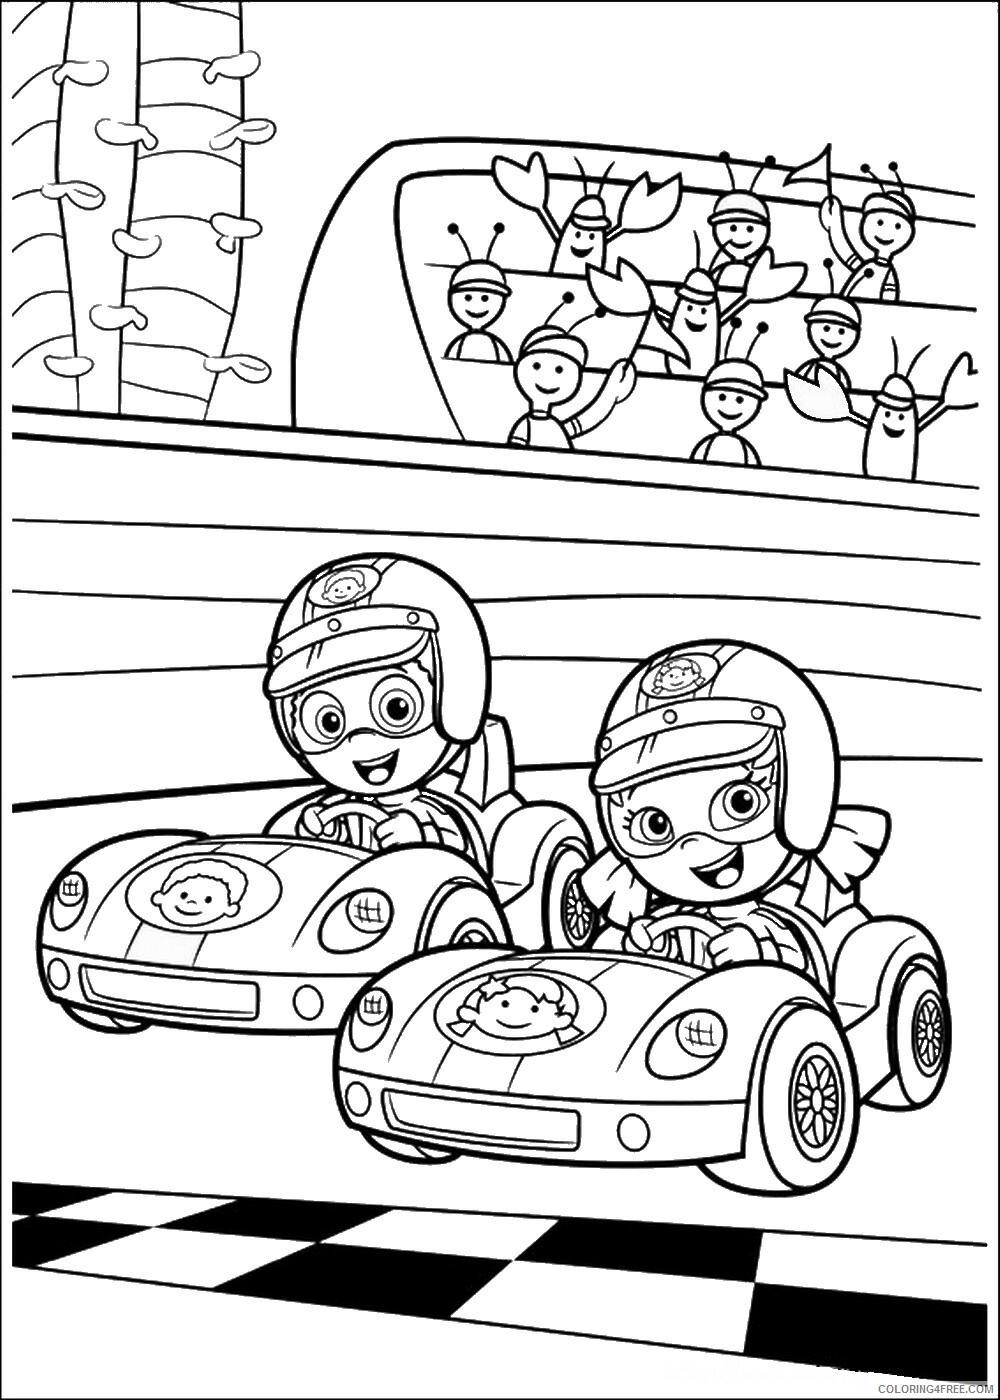 Bubble Guppies Coloring Pages TV Film bubble_guppies_cl01 Printable 2020 01532 Coloring4free